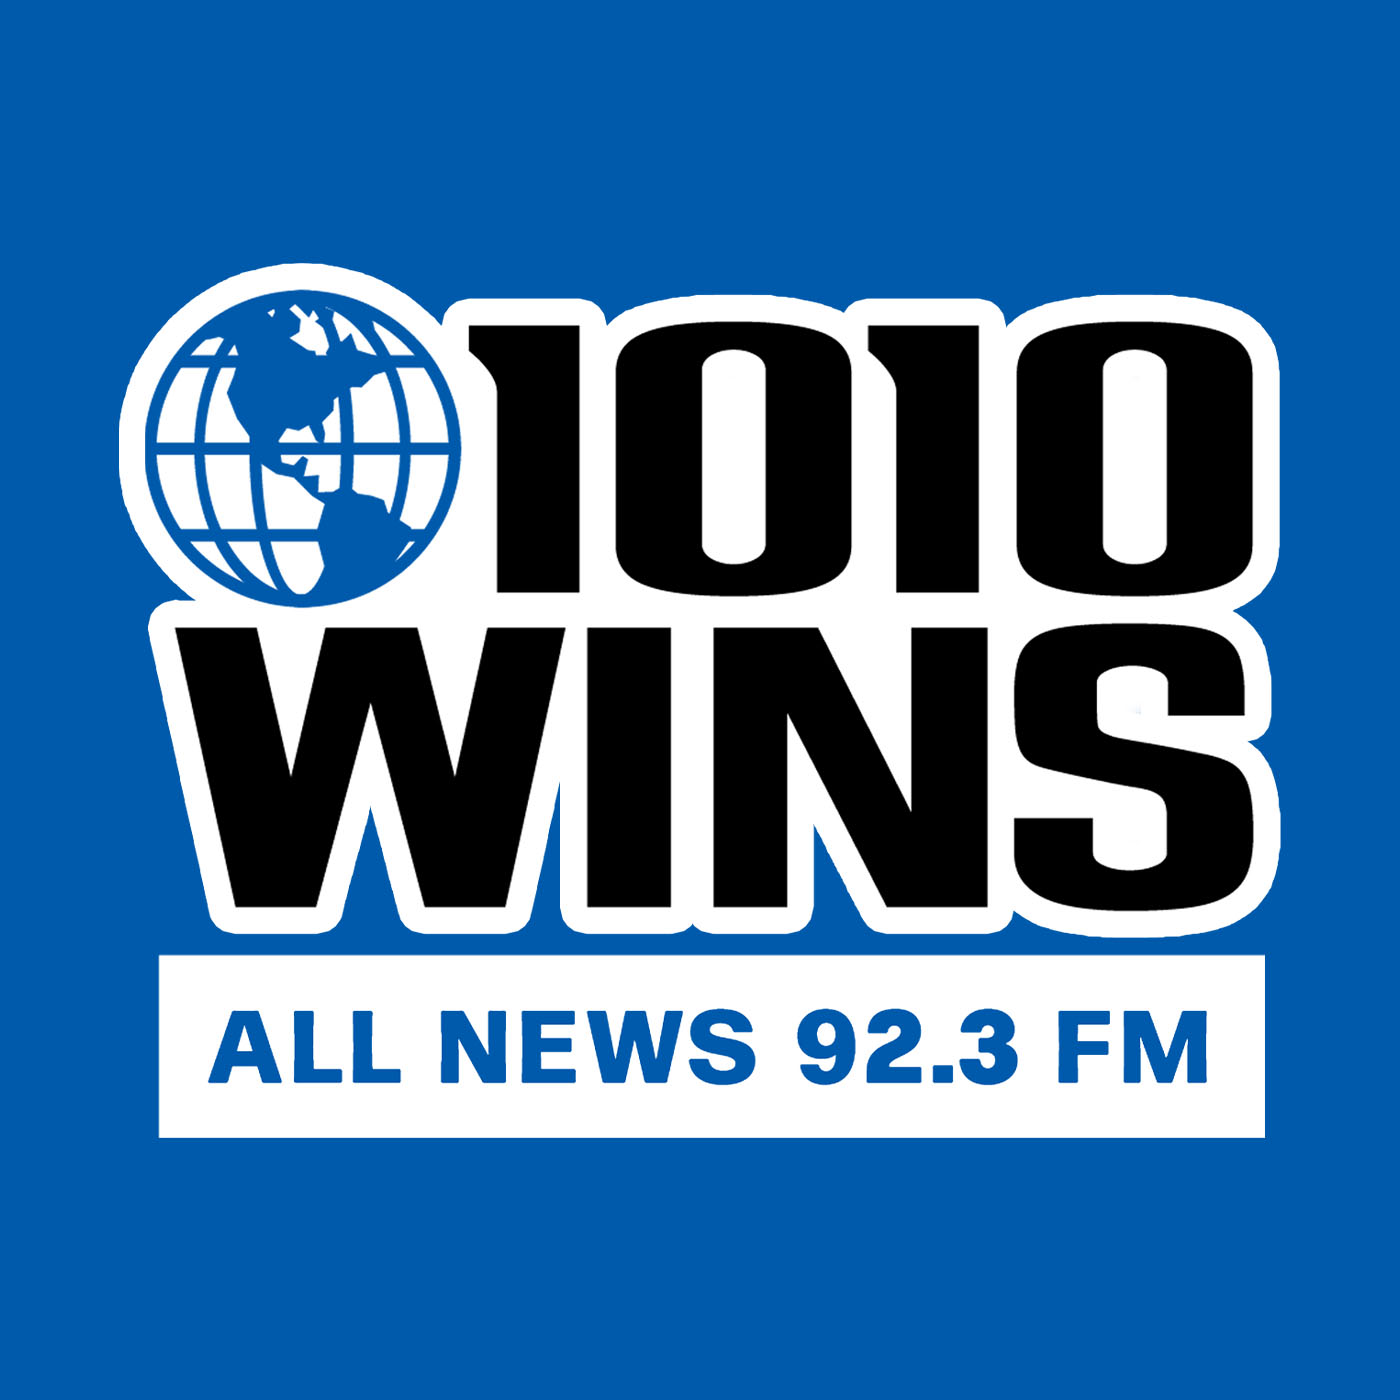 1010 WINS Newsline: Barry Manilow and Bruce Sussman join Brigitte Quinn to discuss his off-Broadway show, 'Harmony: A New Musical'.